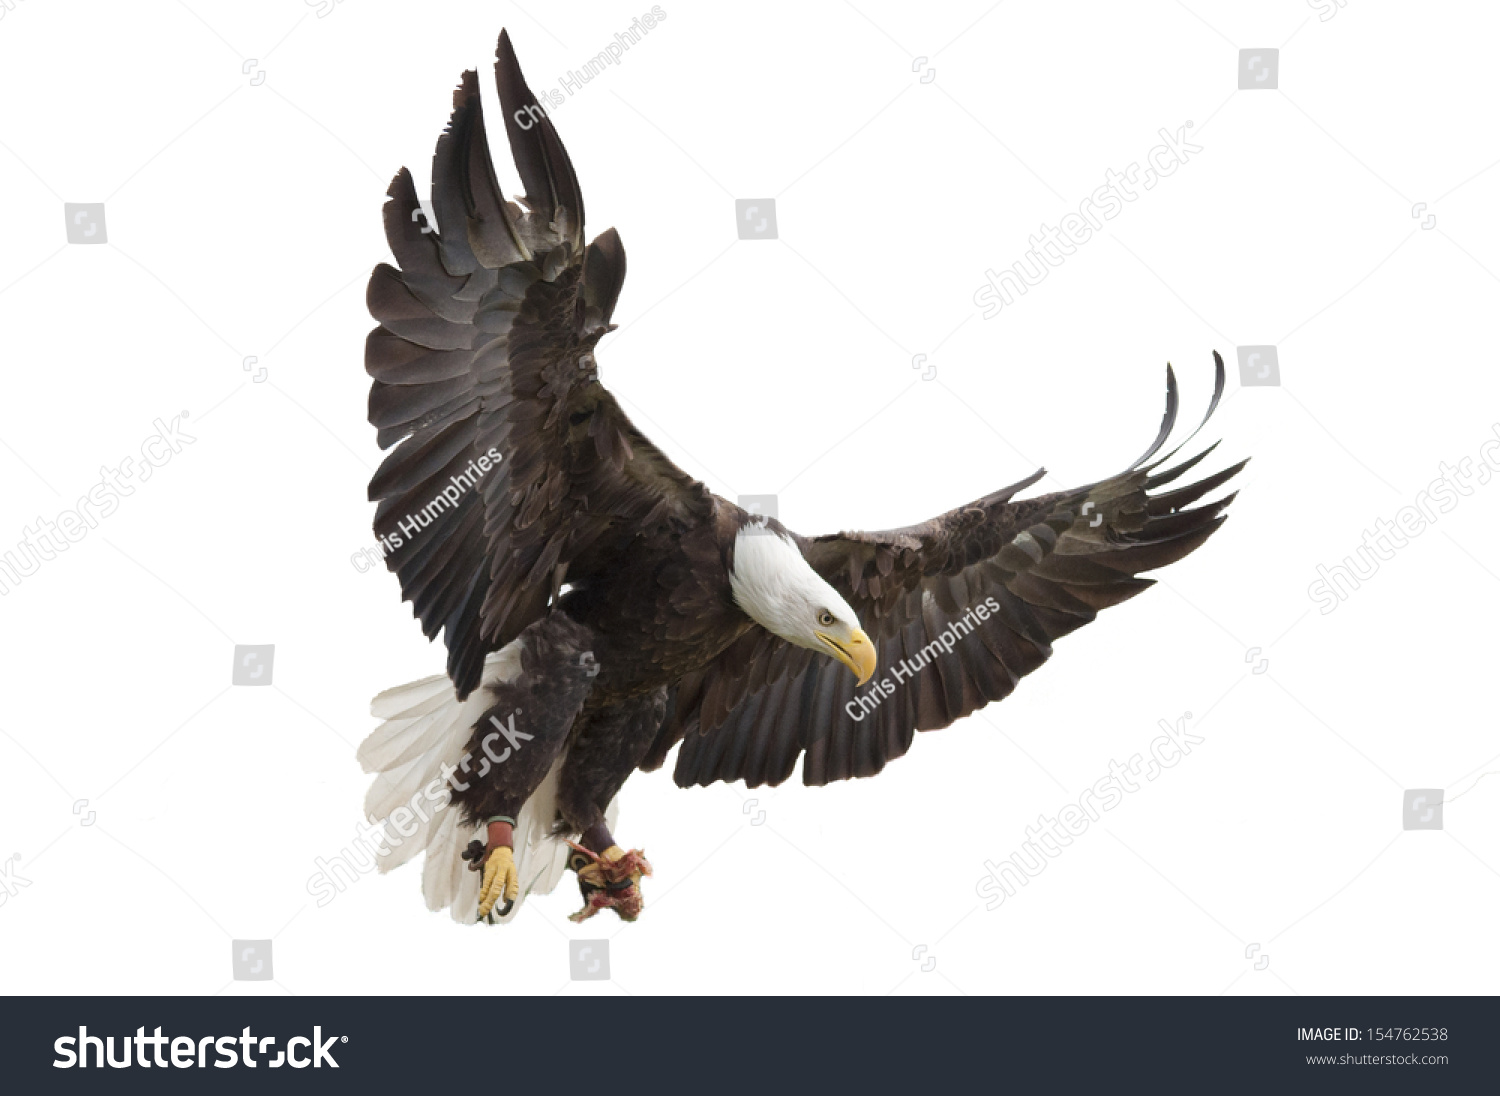 North American Bald Eagle on white background #154762538